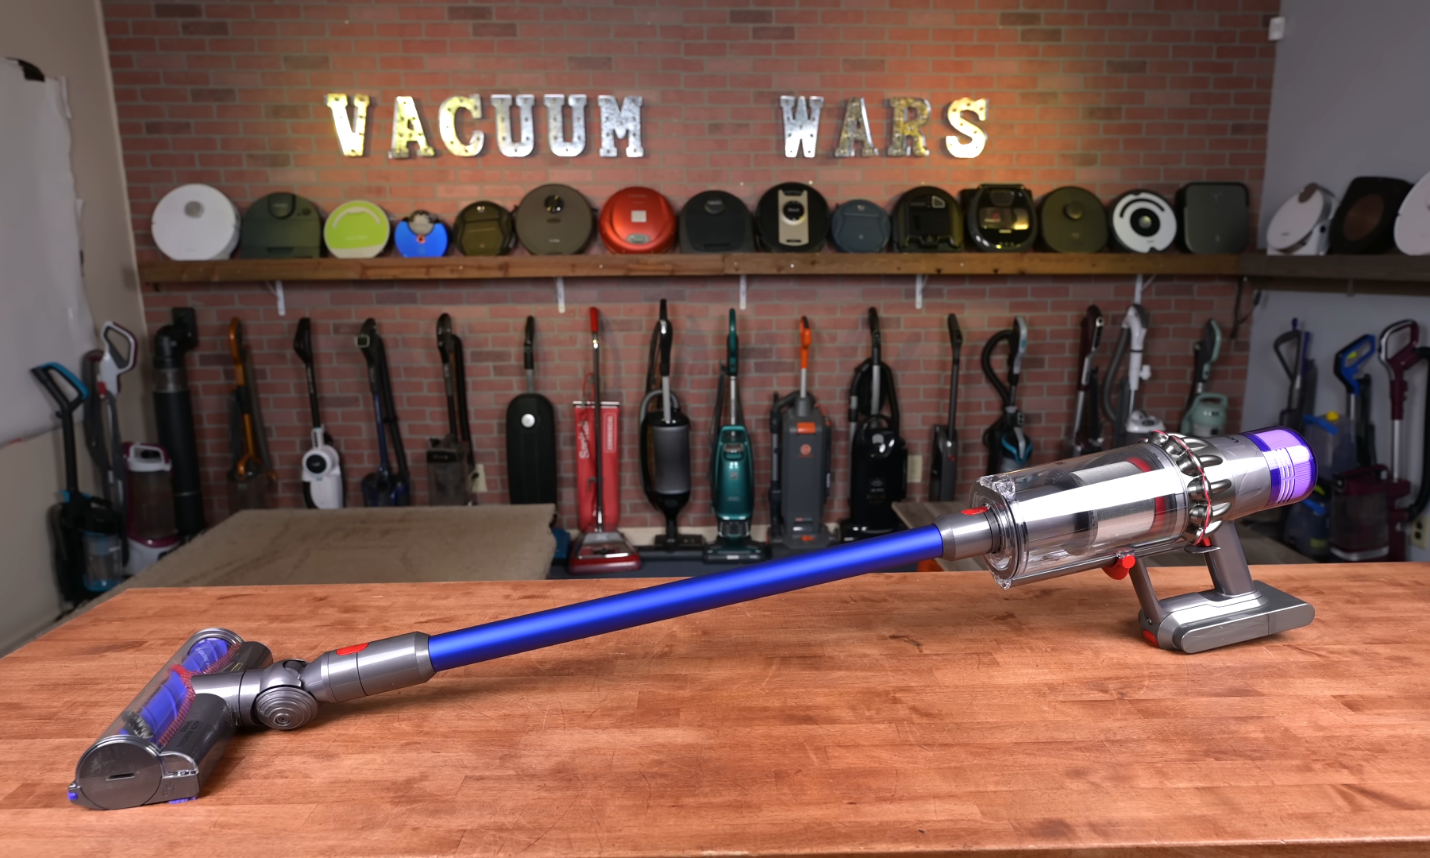 The Dyson V11 cordless vacuum displayed prominently on a wooden table in a well-organized workshop with various vacuum cleaners showcased in the background